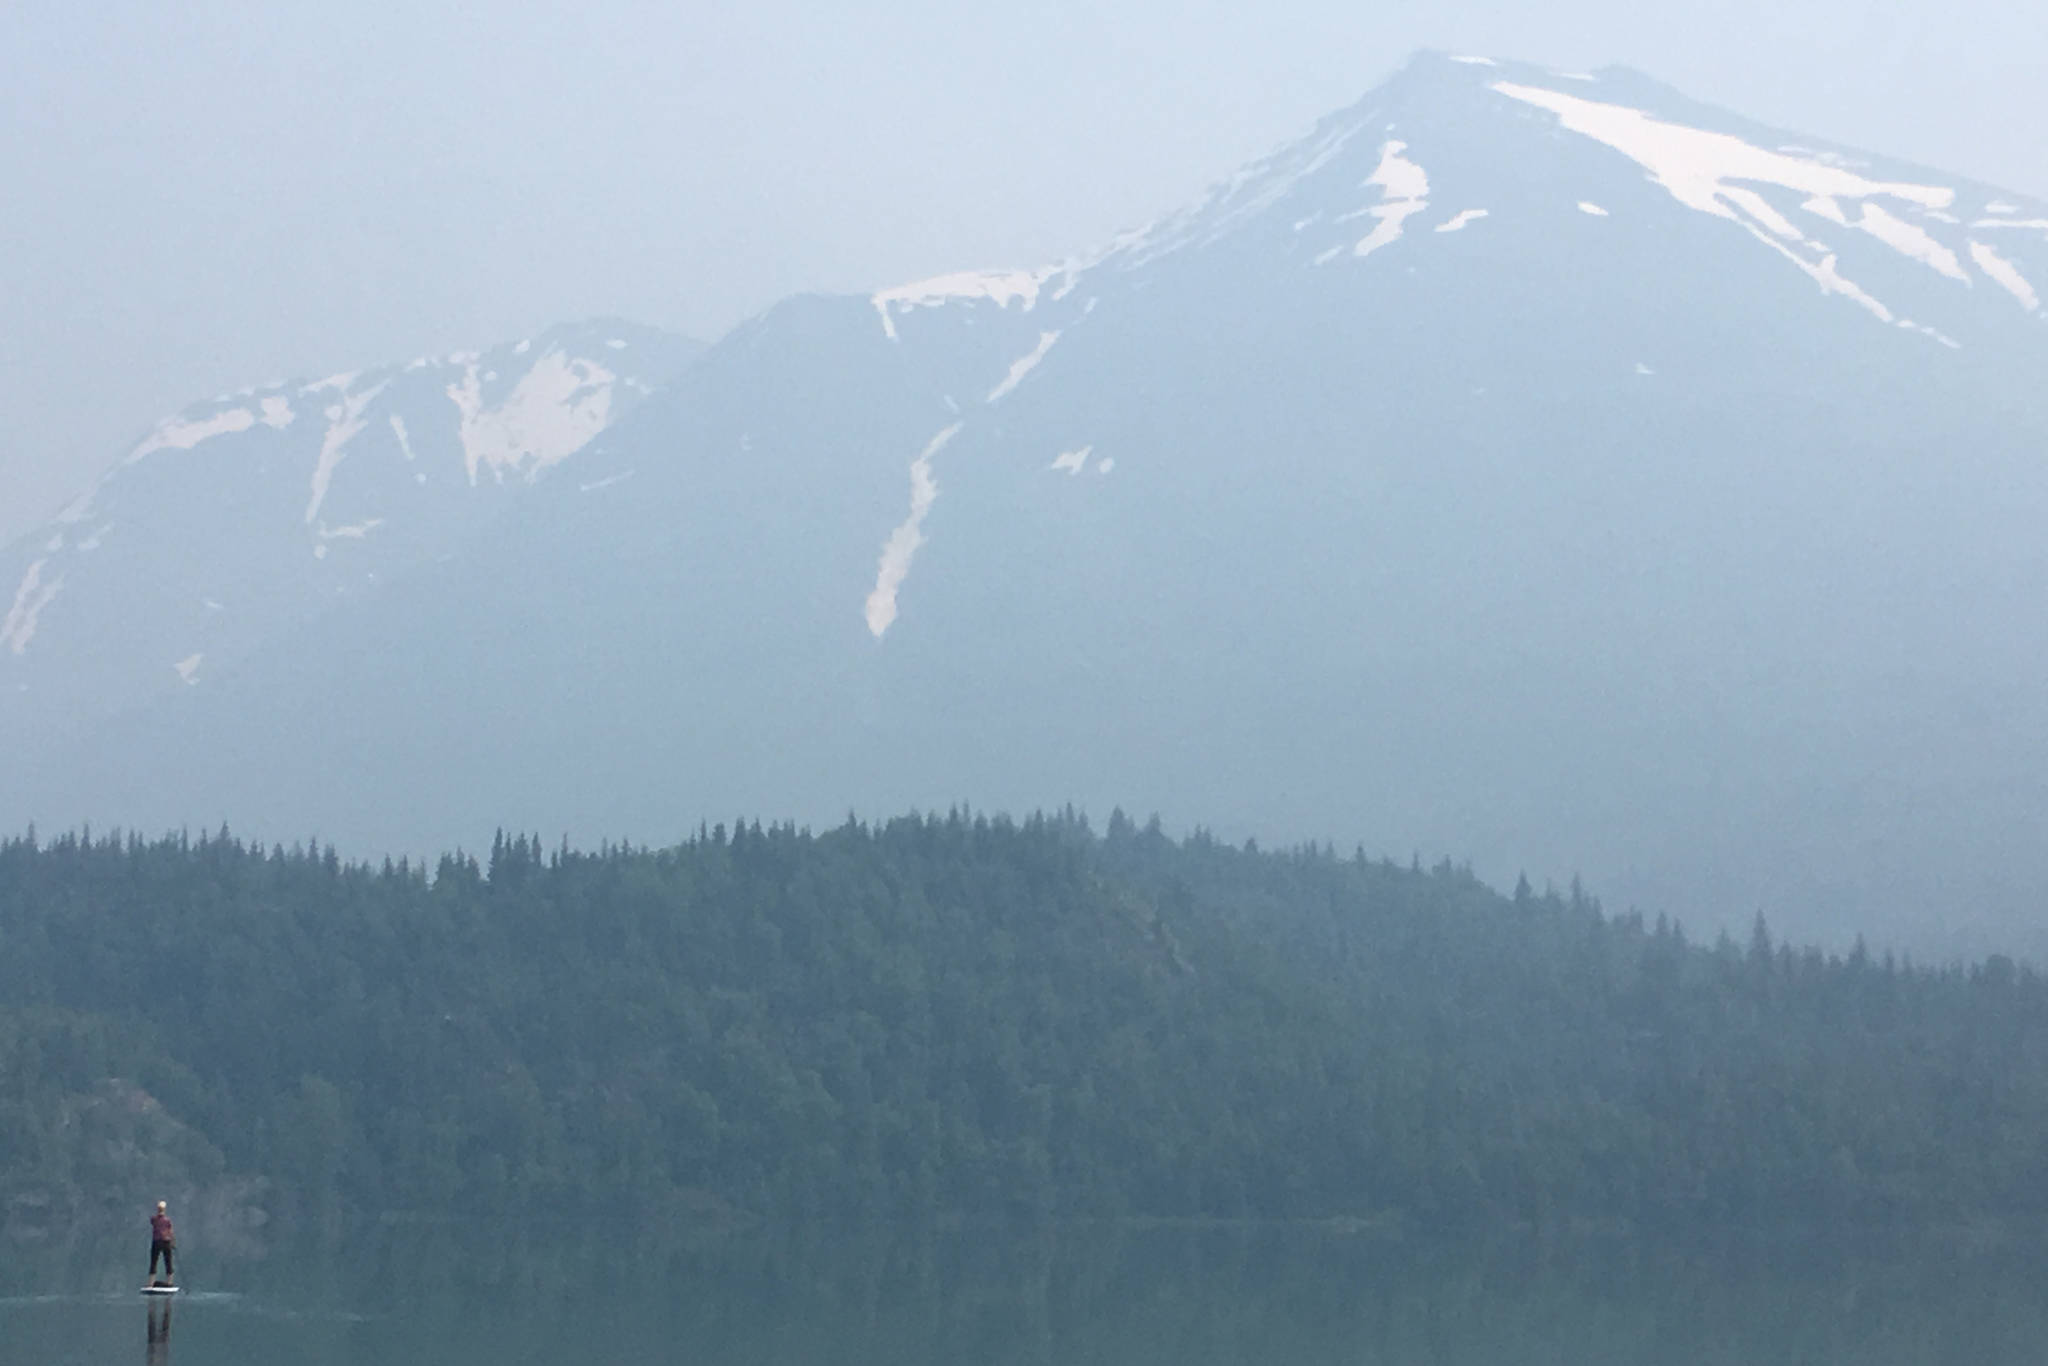 A standup paddleboarder braves smoky conditions on Lower Trail Lake on Wednesday, June 26, 2019, near Moose Pass, Alaska. Smoky conditions persisted throughout the Kenai Peninsula due to the Swan Lake Fire burning north of the Sterling Highway. (Photo by Jeff Helminiak/Peninsula Clarion)